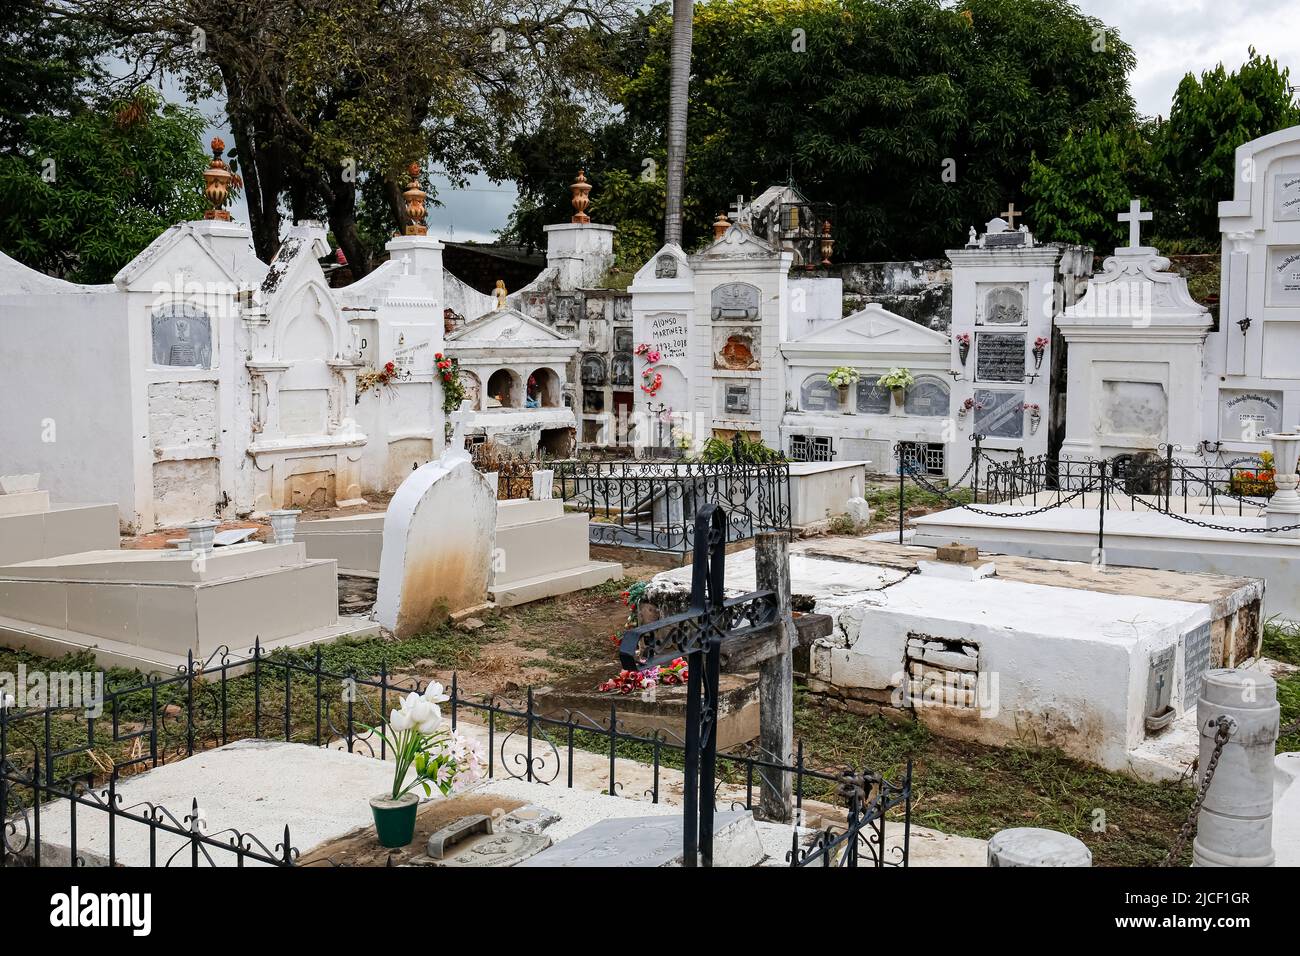 Cemetery with white gravestones and statues, trees in background at Santa Cruz de Mompox Stock Photo